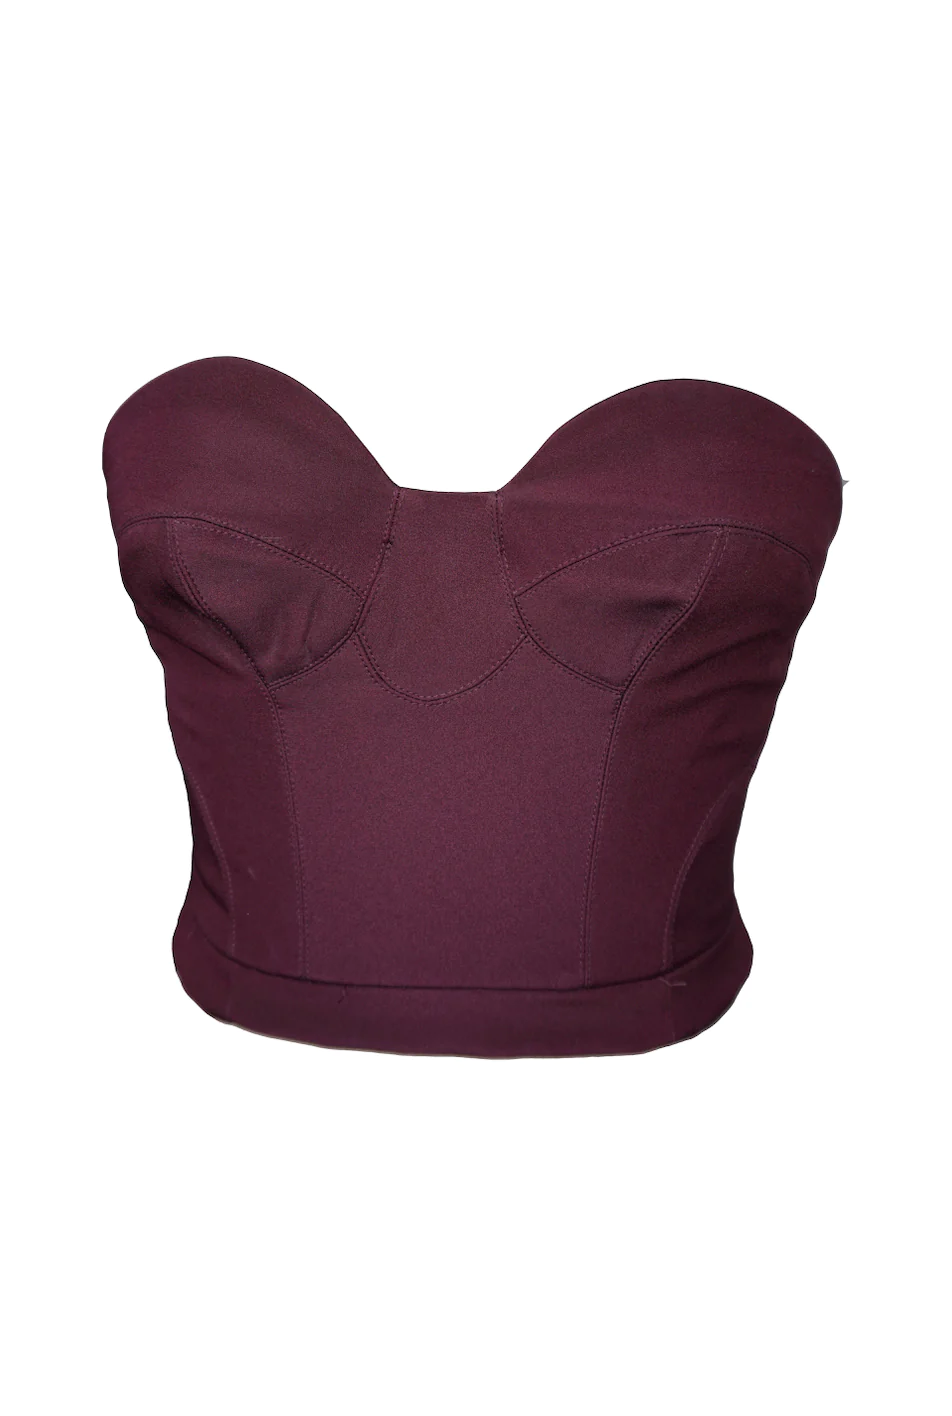 A Plum Bustier Strapless Crop Top with a large bow at the back.